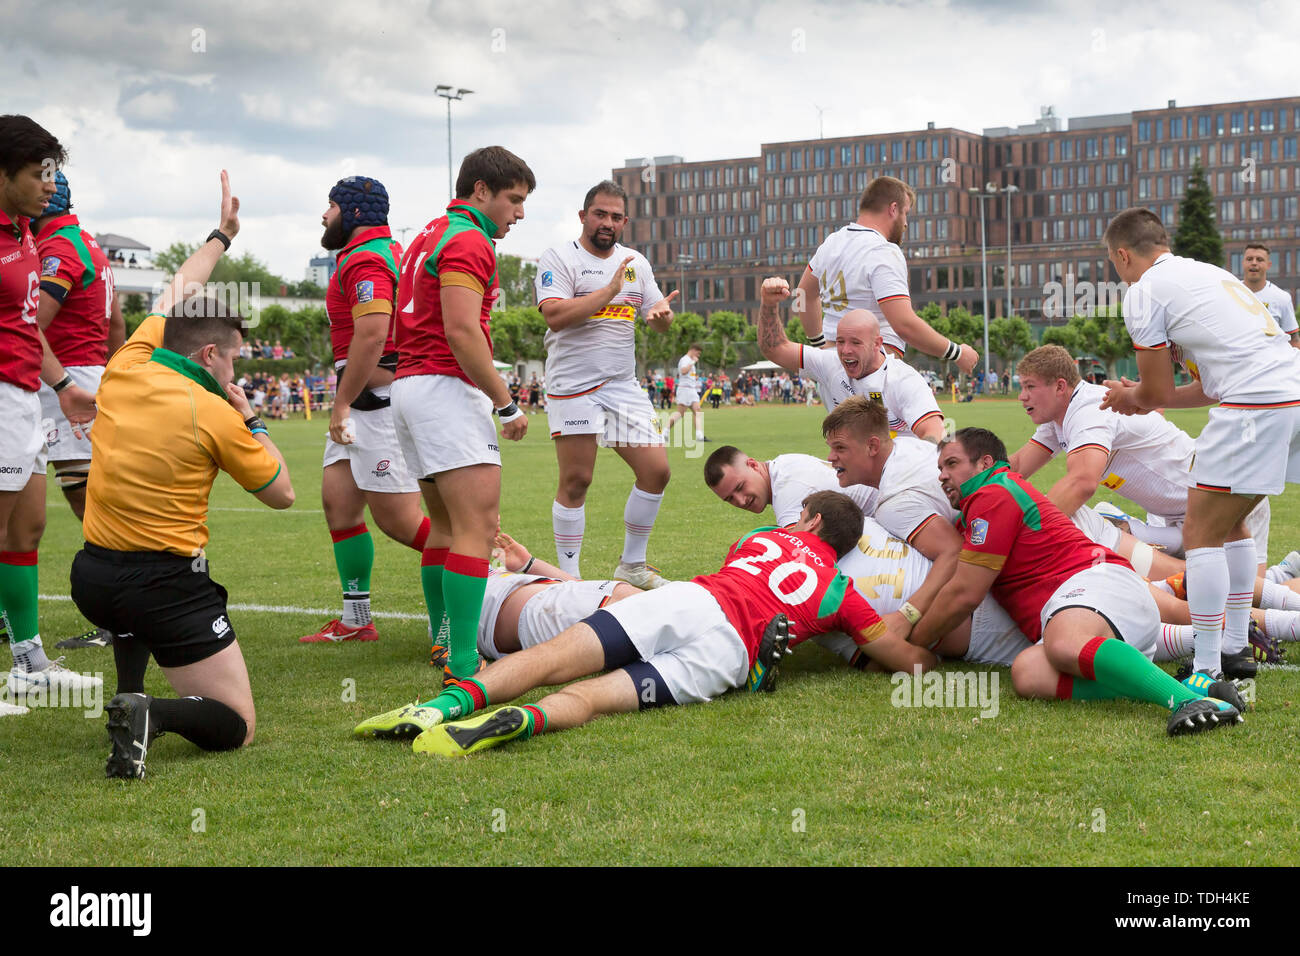 Hessen, Germany. 15th June, 2019. Rugby: EM, Relegation, Germany - Portugal. Referee Sean Gallagher (IRL) indicates the attempt for Germany by Dasch Barber (Germany, 16). Samy Fuechsel (Germany, 18) applauds, Jamie Murphy (Germany, 13) cheers. Credit: dpa picture alliance/Alamy Live News Stock Photo